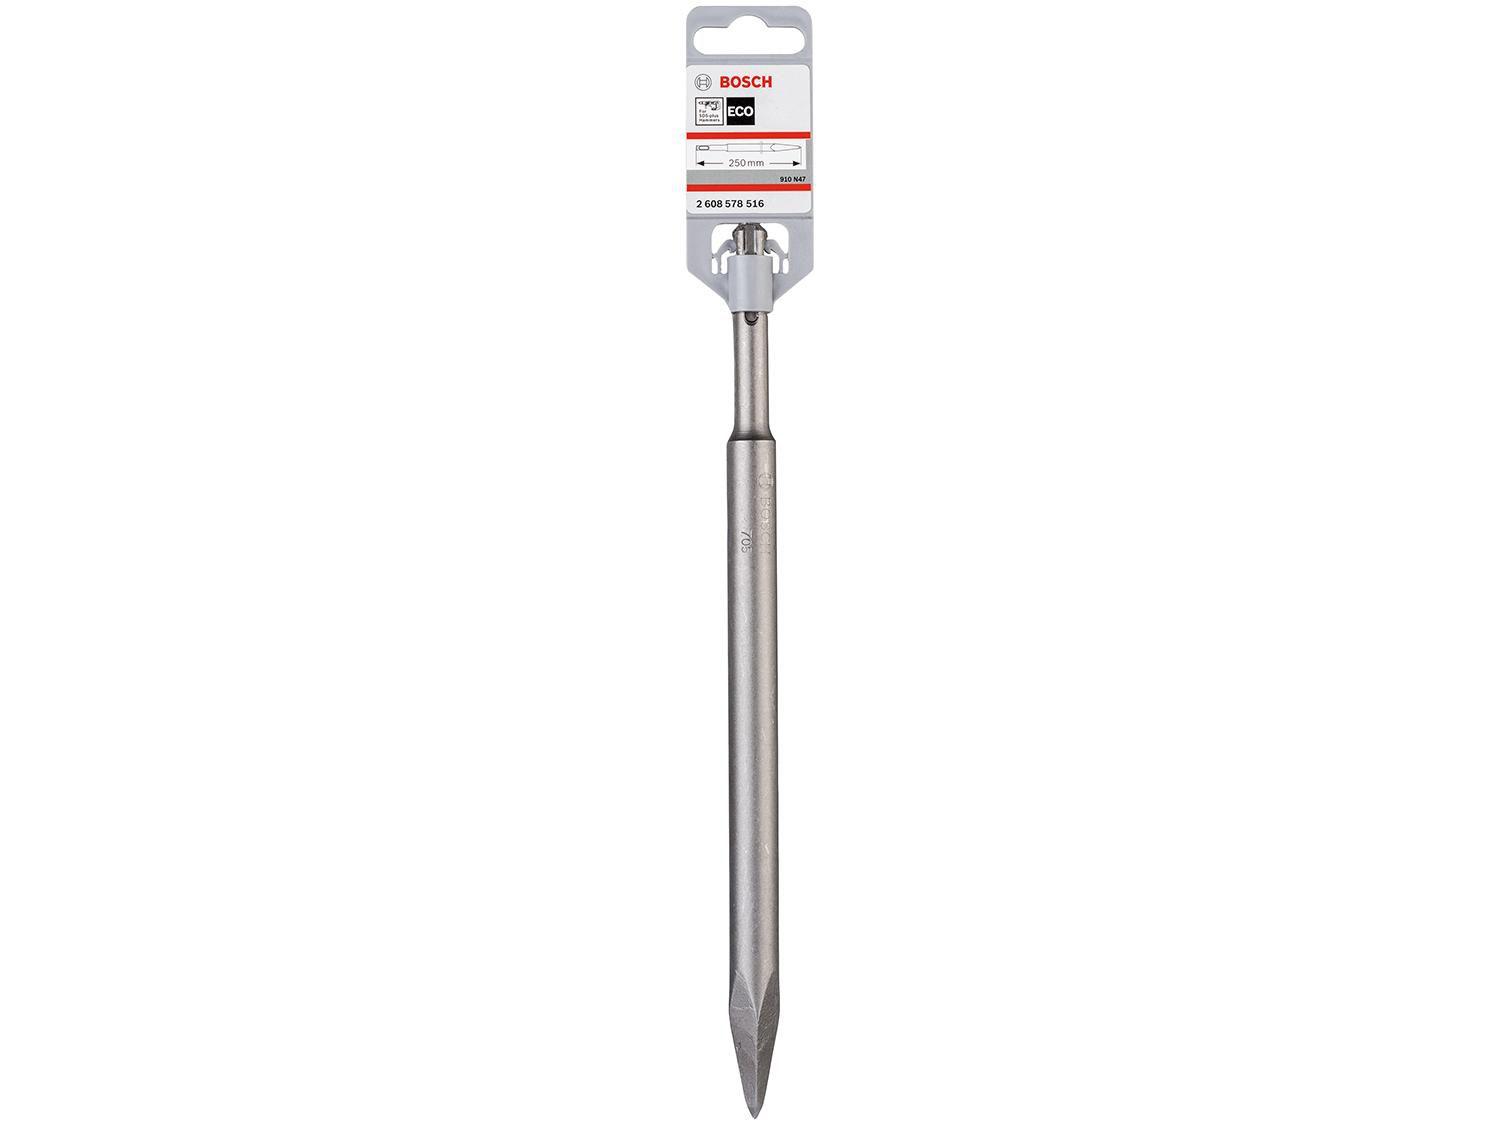 Bosch Pointed Chisel SDS-Plus 2608578516 Power Tool Services